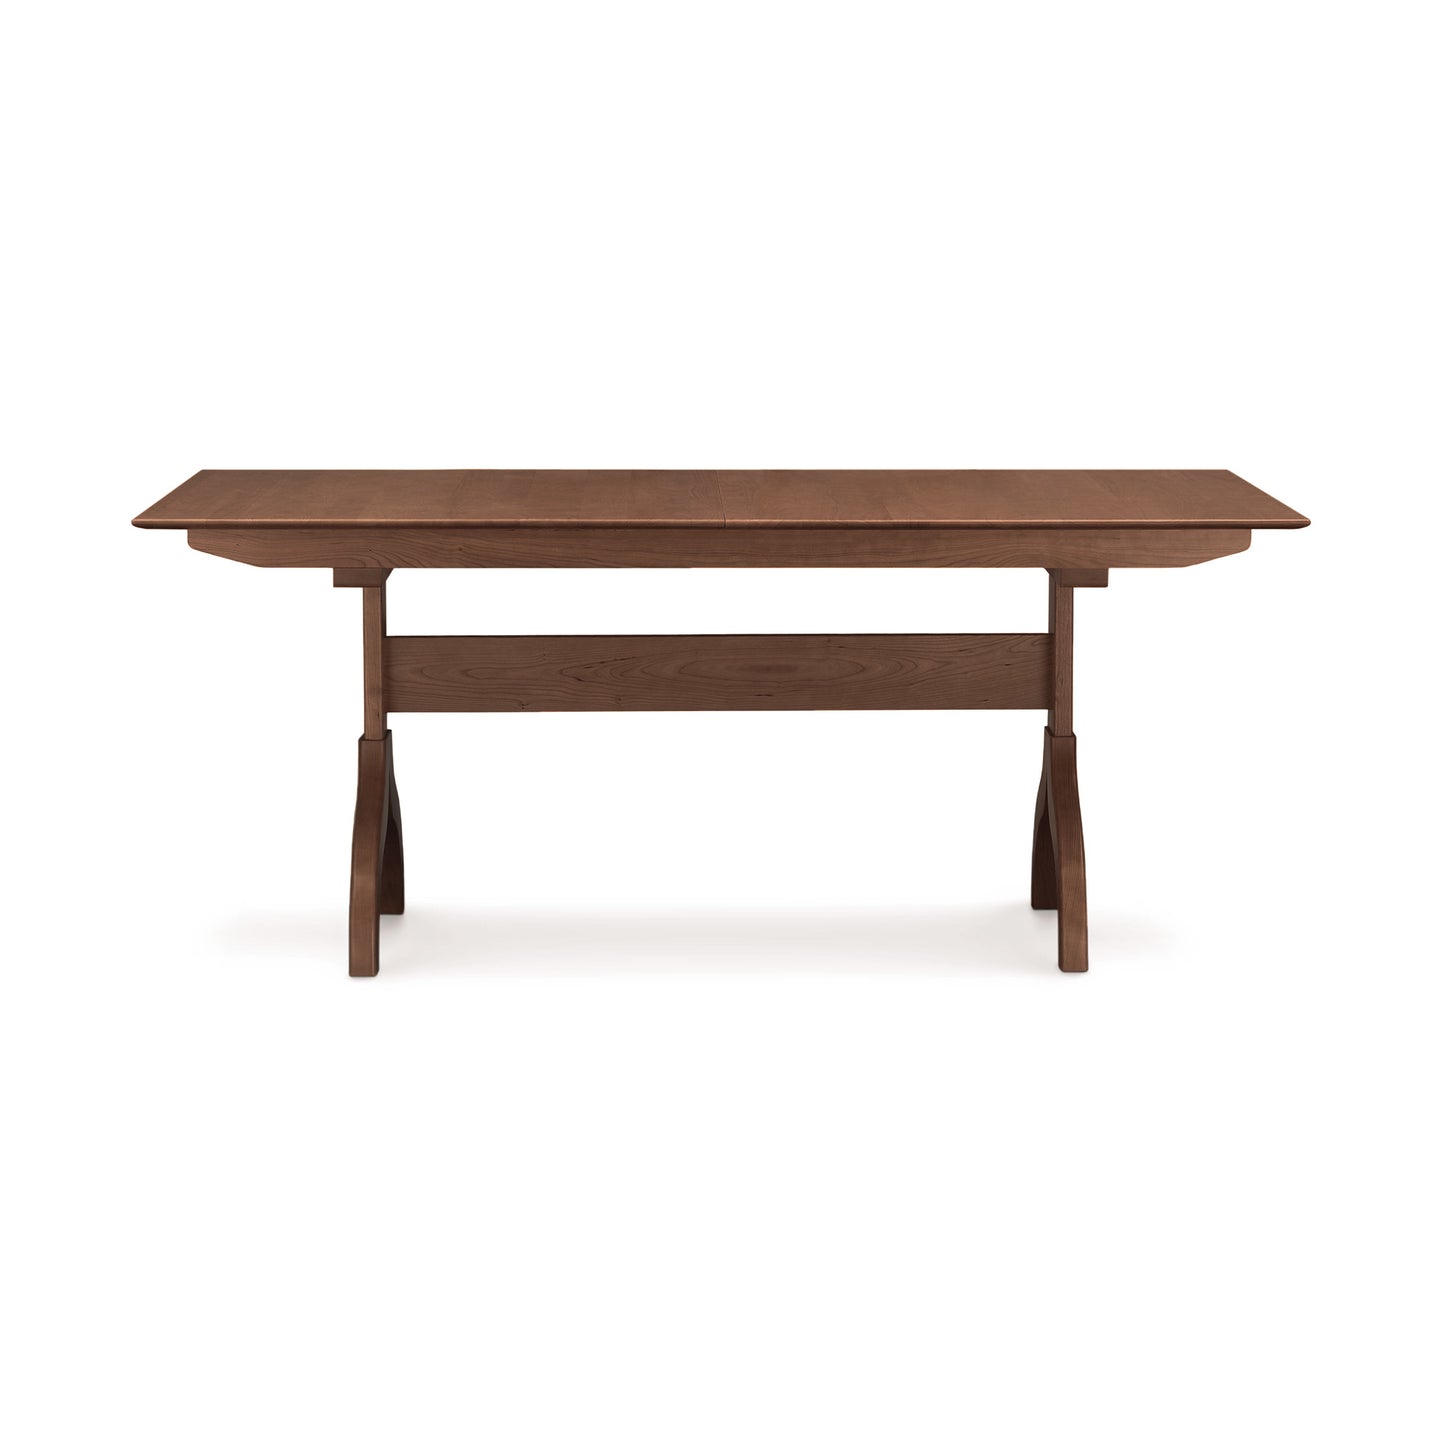 A Sarah Shaker Trestle Extension Table with drop-leaf sides on a white background by Copeland Furniture.